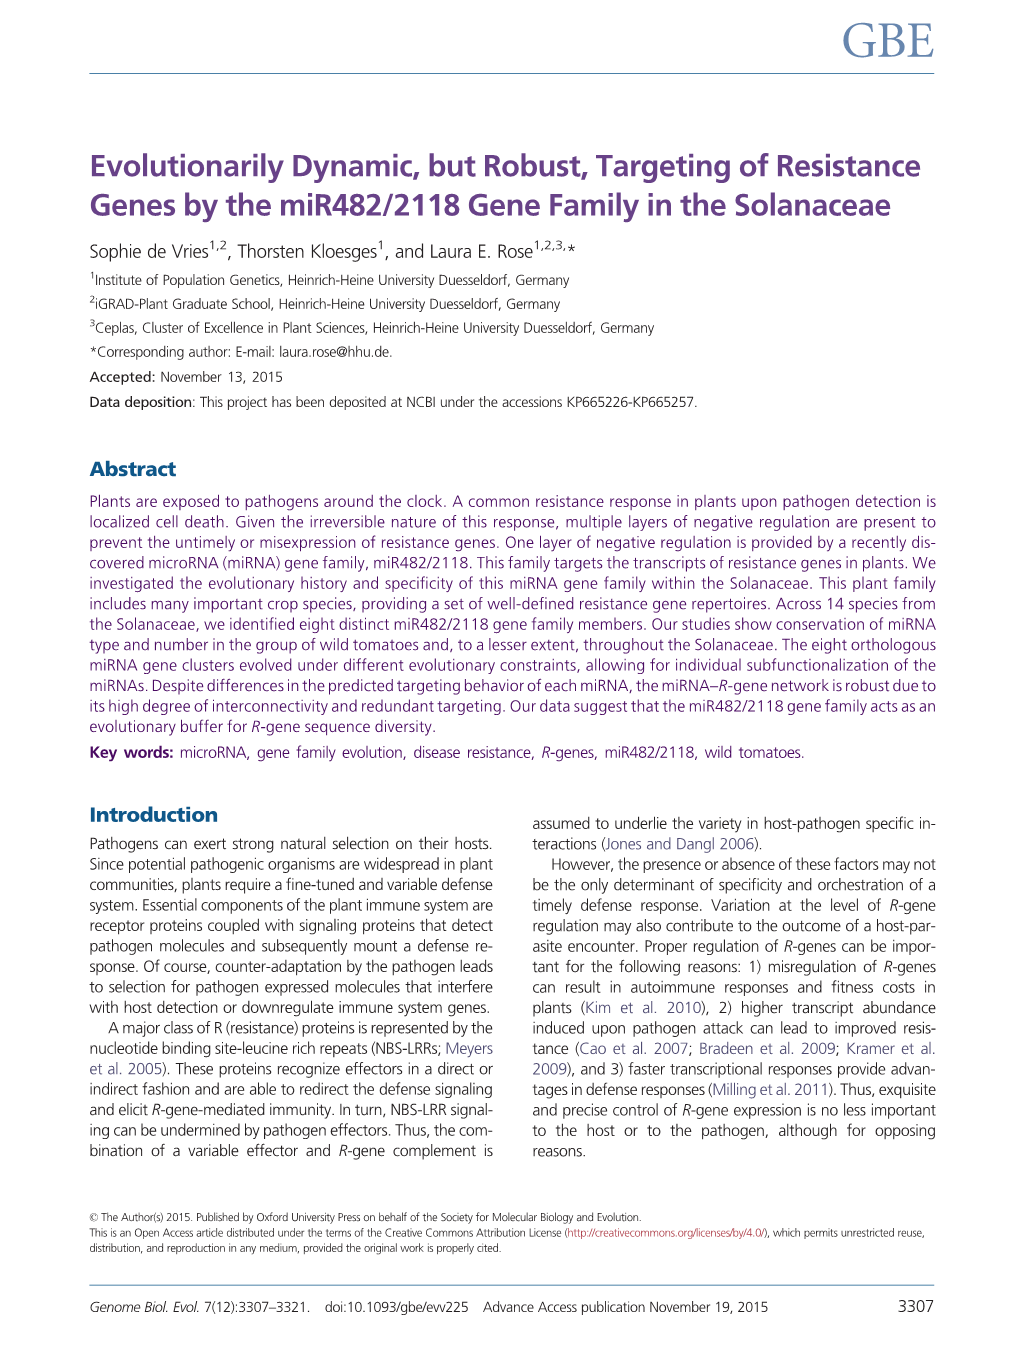 Evolutionarily Dynamic, but Robust, Targeting of Resistance Genes by the Mir482/2118 Gene Family in the Solanaceae